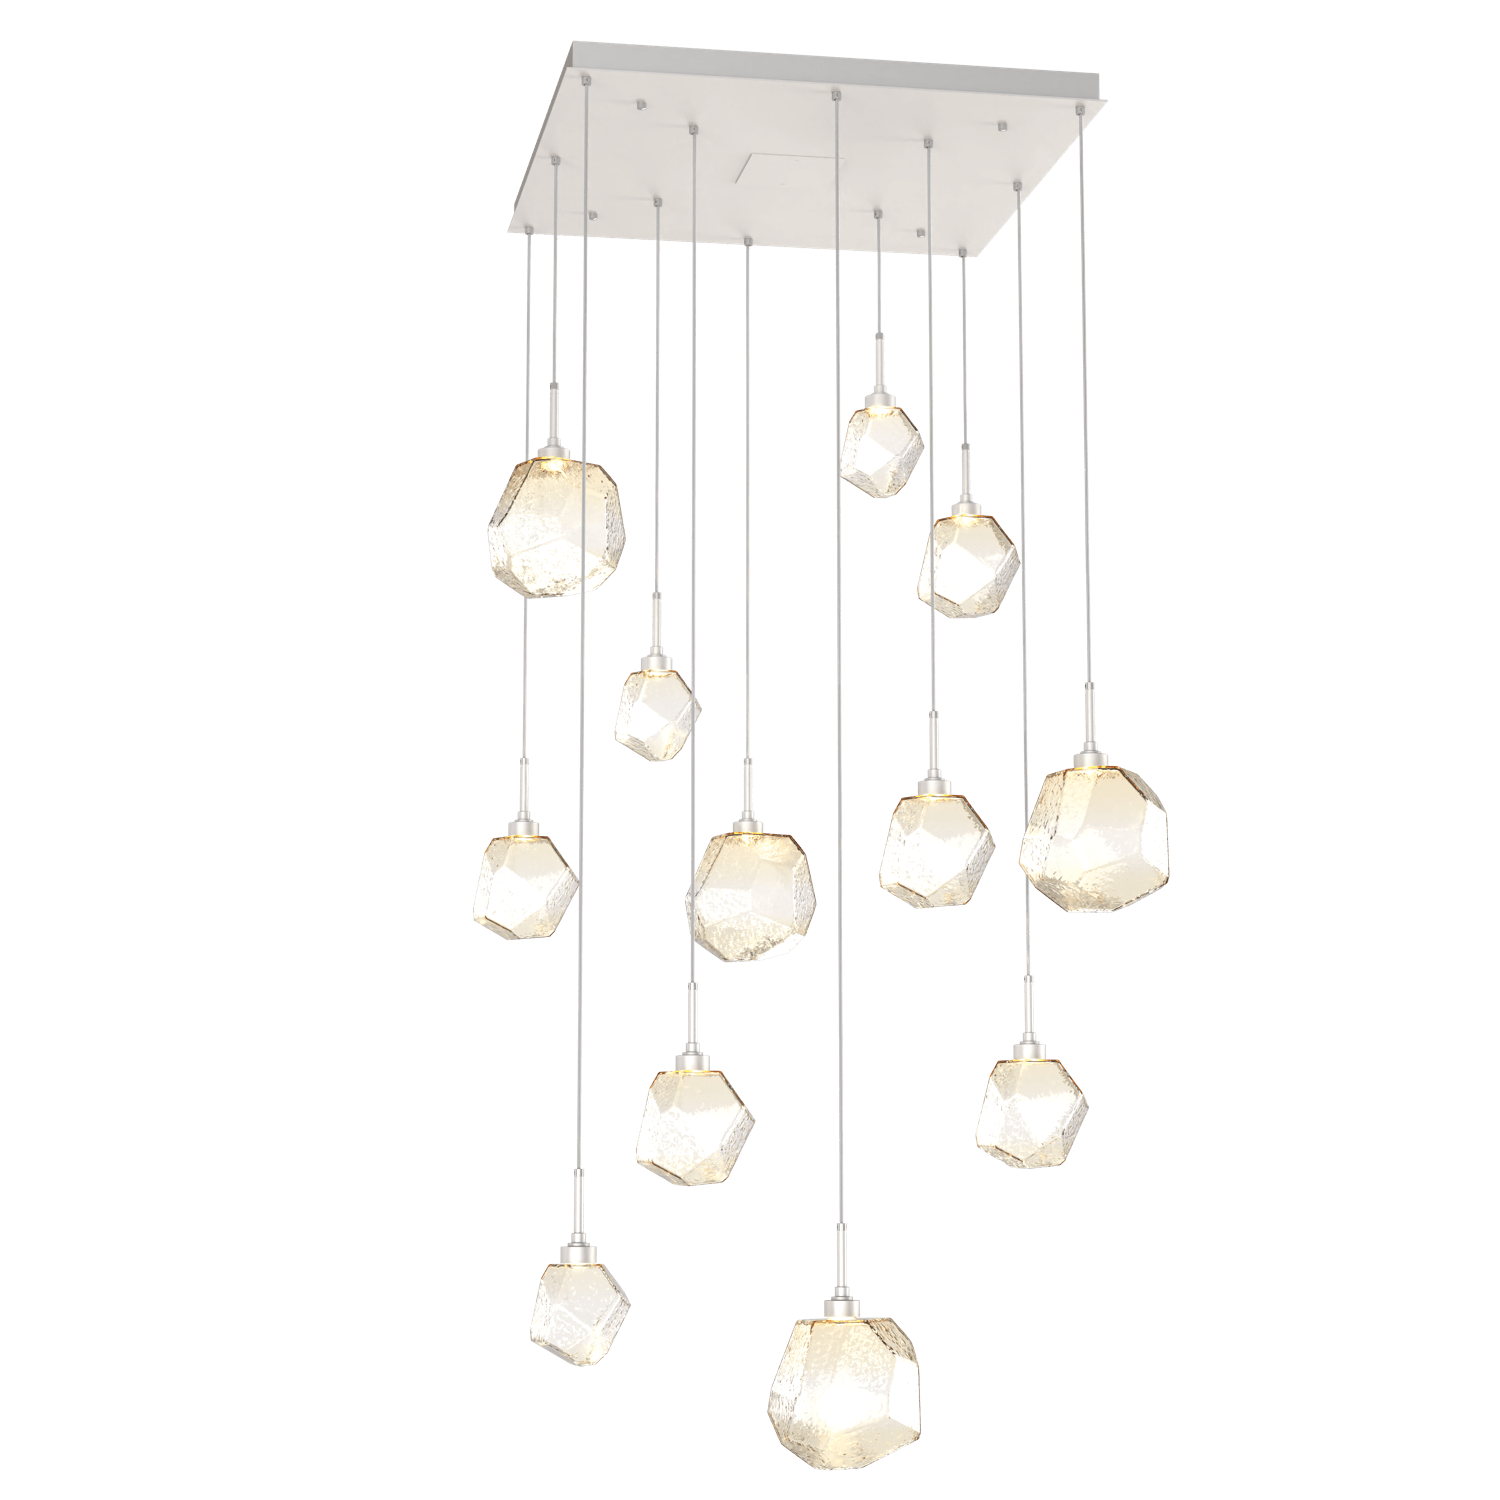 CHB0039-12-BS-A-Hammerton-Studio-Gem-12-light-square-pendant-chandelier-with-metallic-beige-silver-finish-and-amber-blown-glass-shades-and-LED-lamping